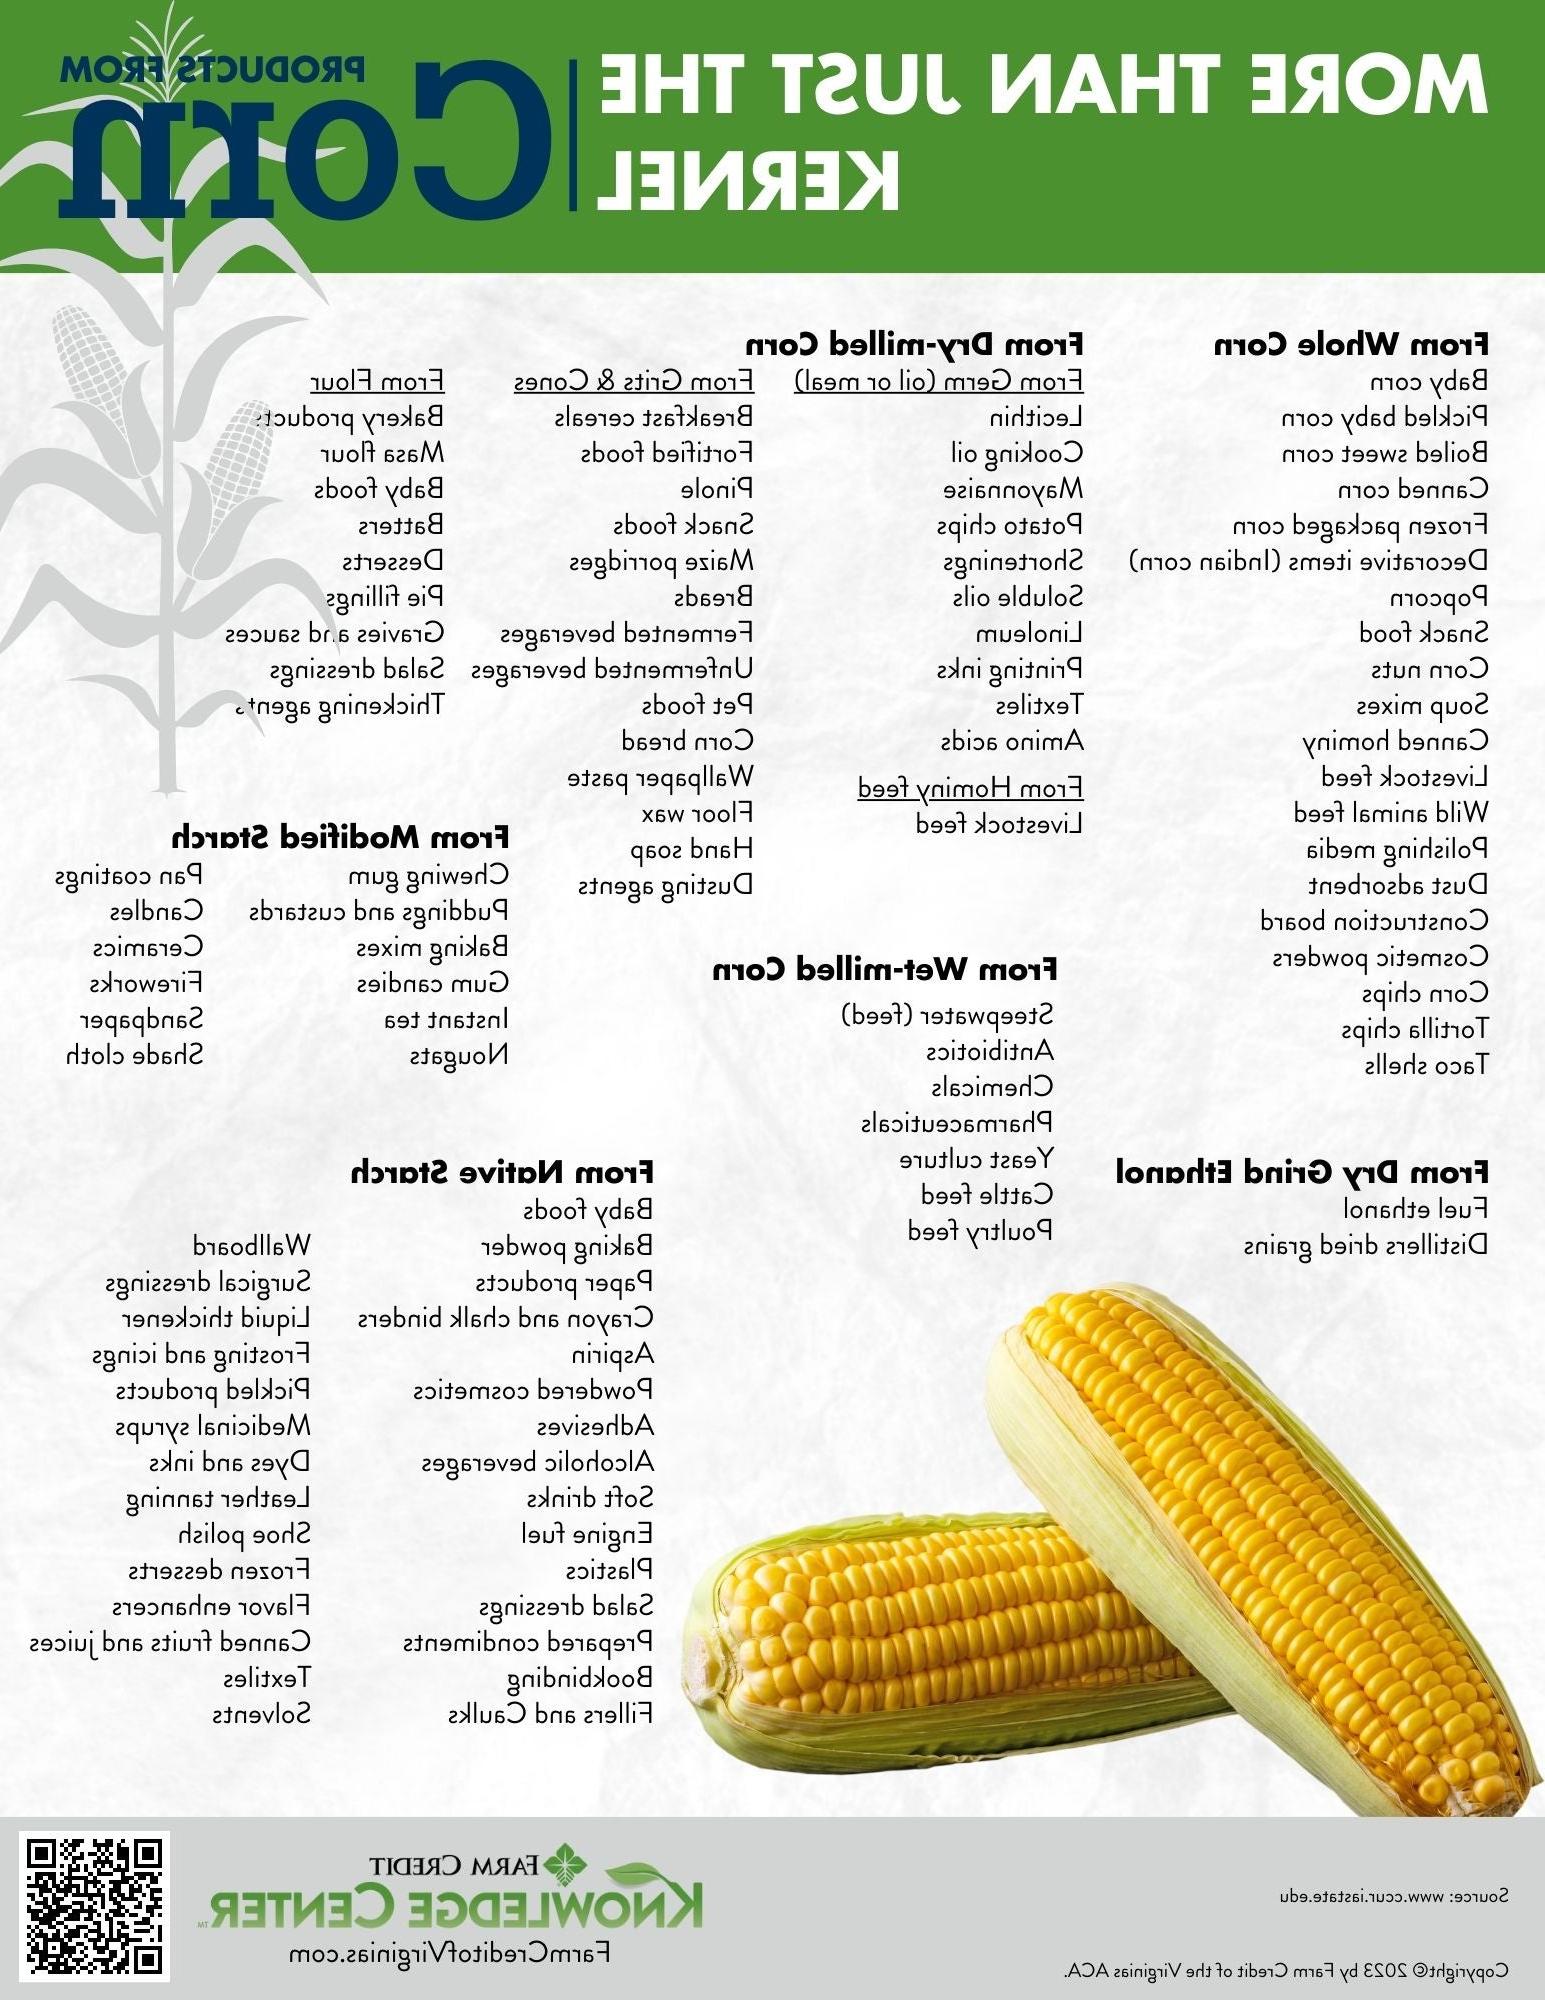 More than just the kernel products made from corn infographic